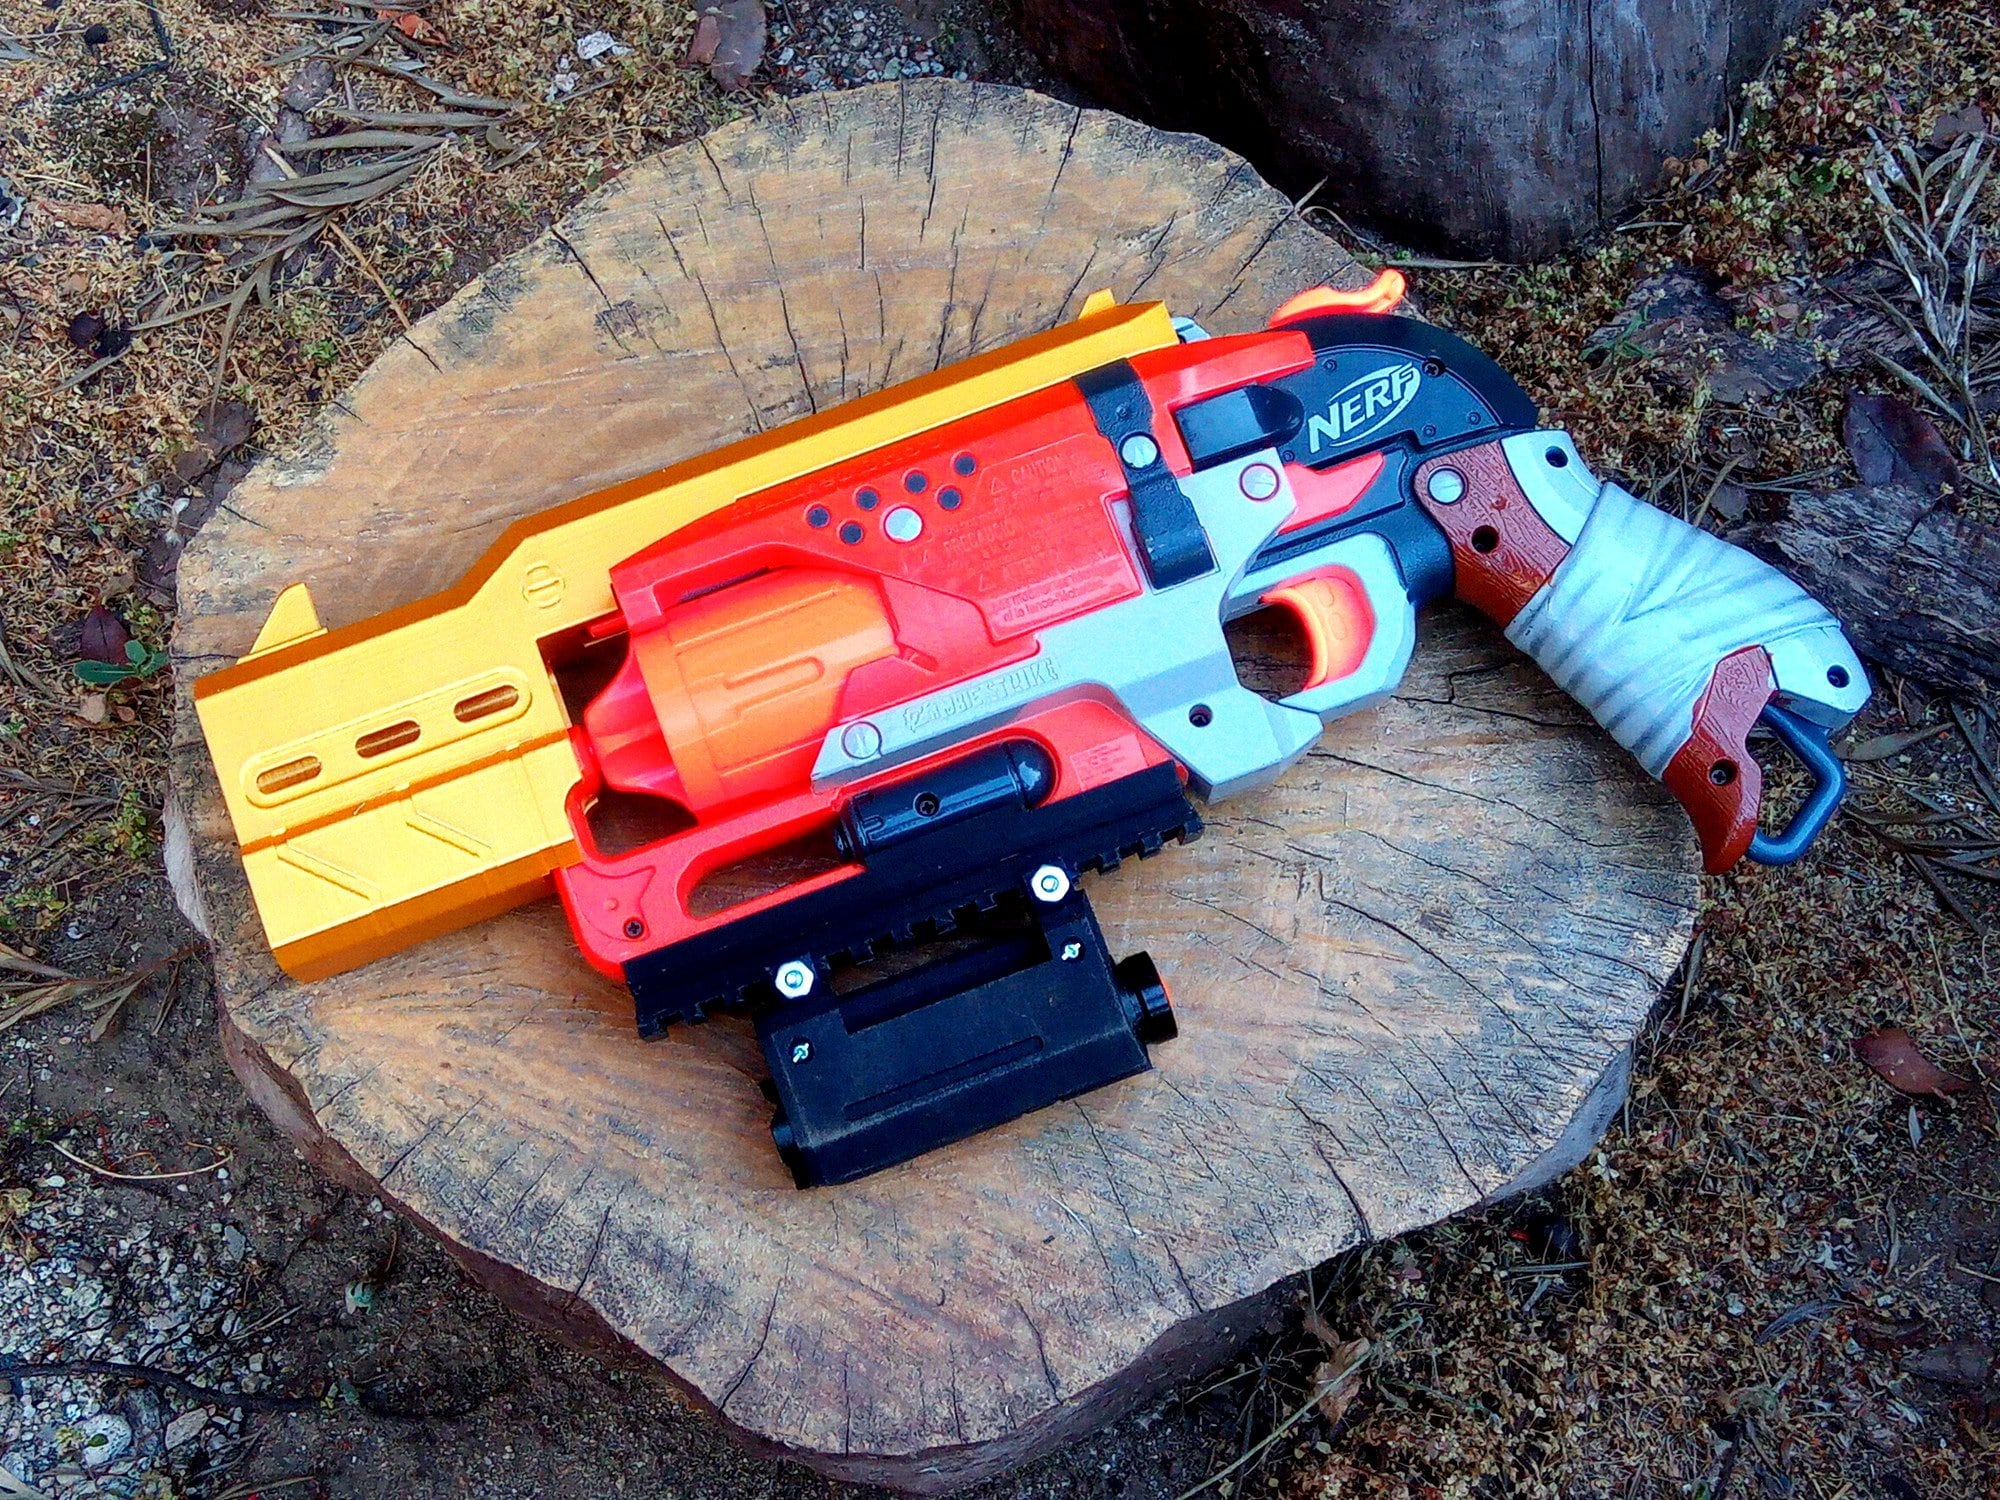 Blasters3d Proctor Mod for Nerf Zombie - Etsy Ireland